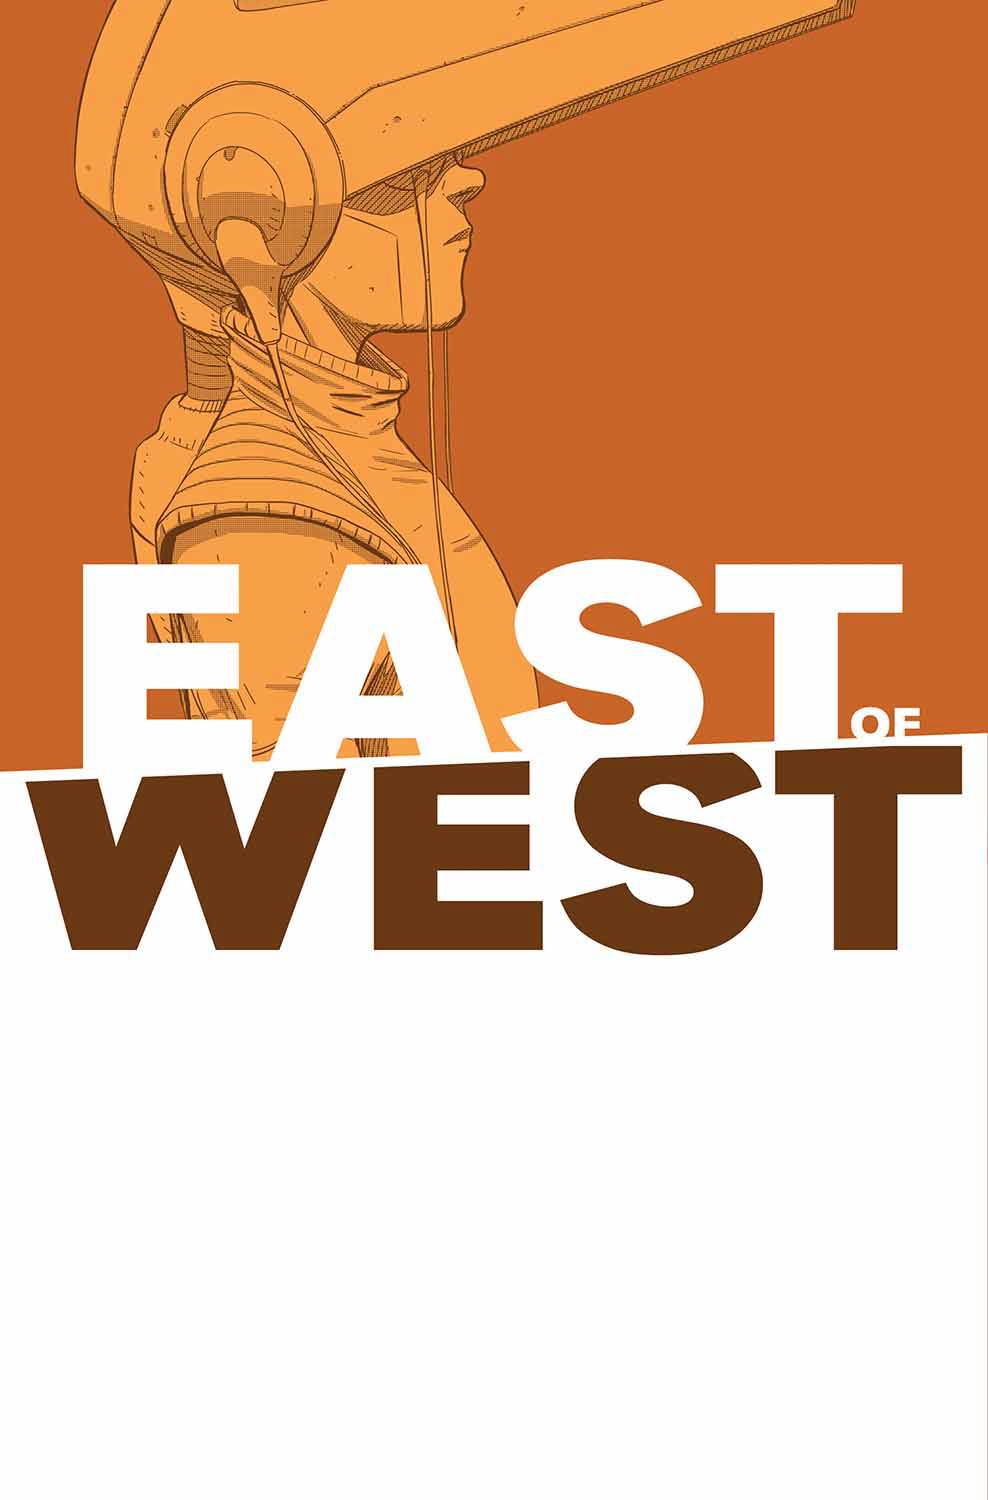 EAST OF WEST TP VOL 06 (MR)